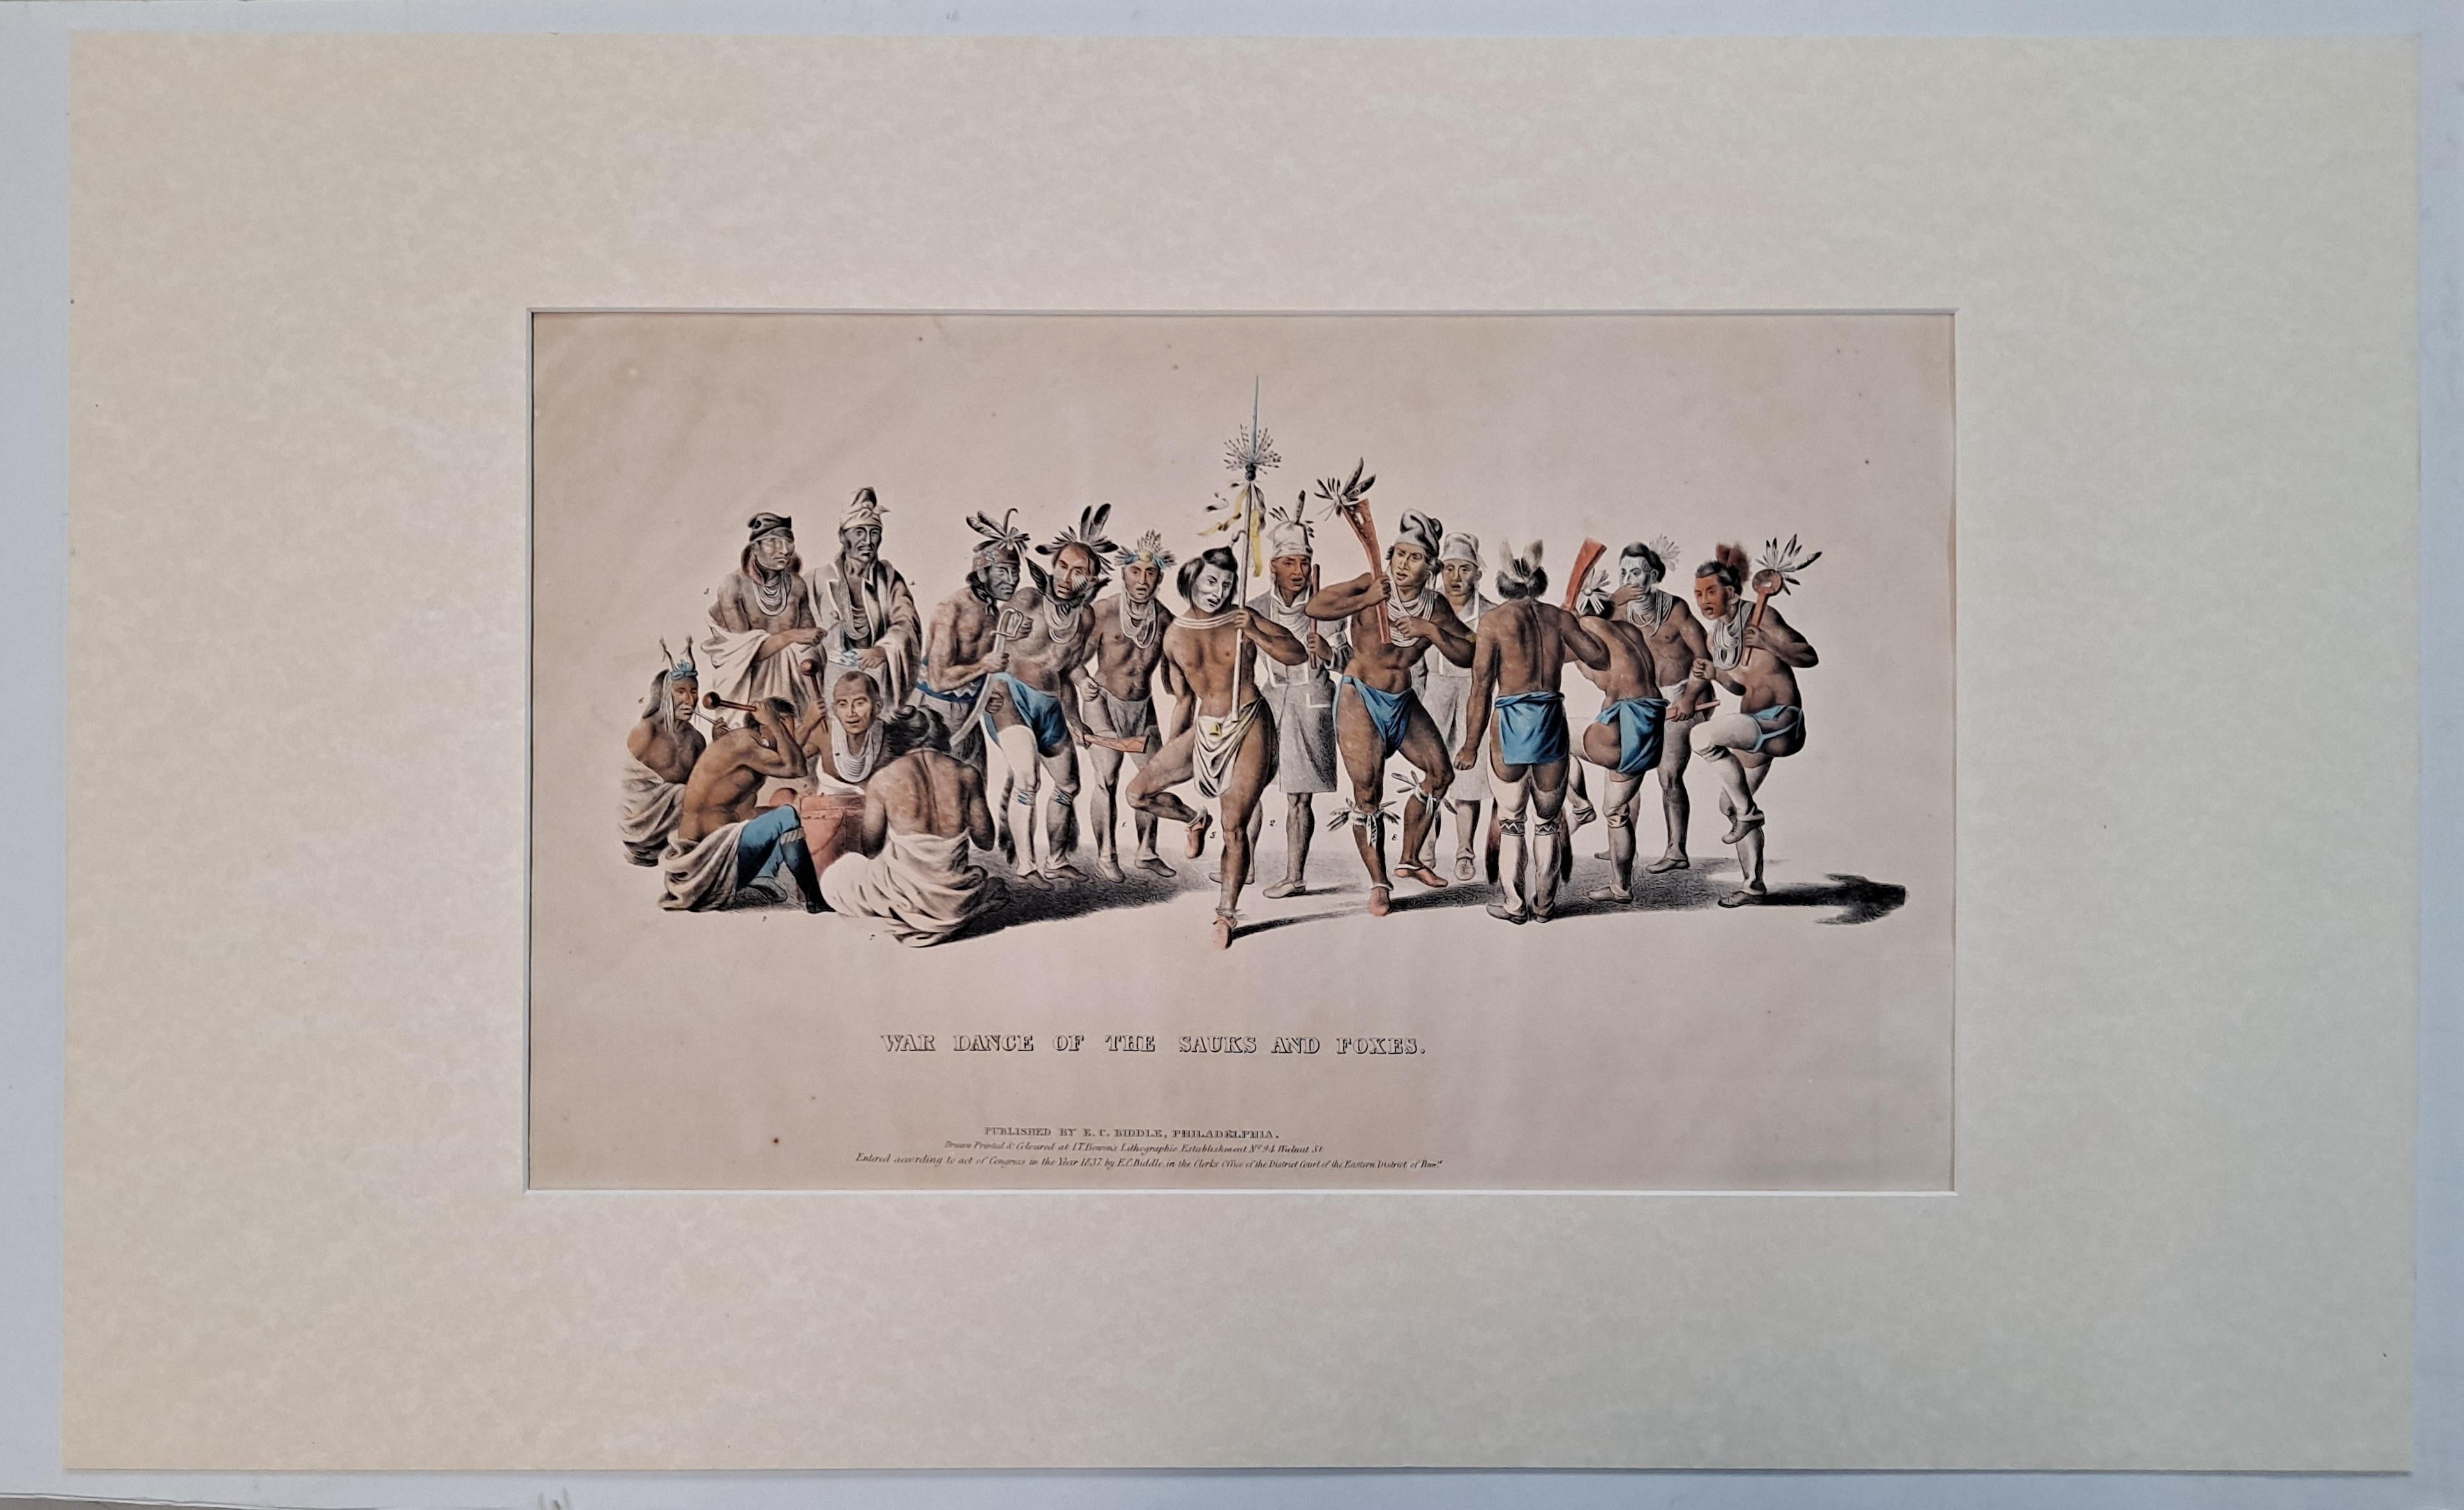 Thomas L. McKenney Figurative Print - War Dance of the Sauks and Foxes Hand Colored Lithograph C.1837